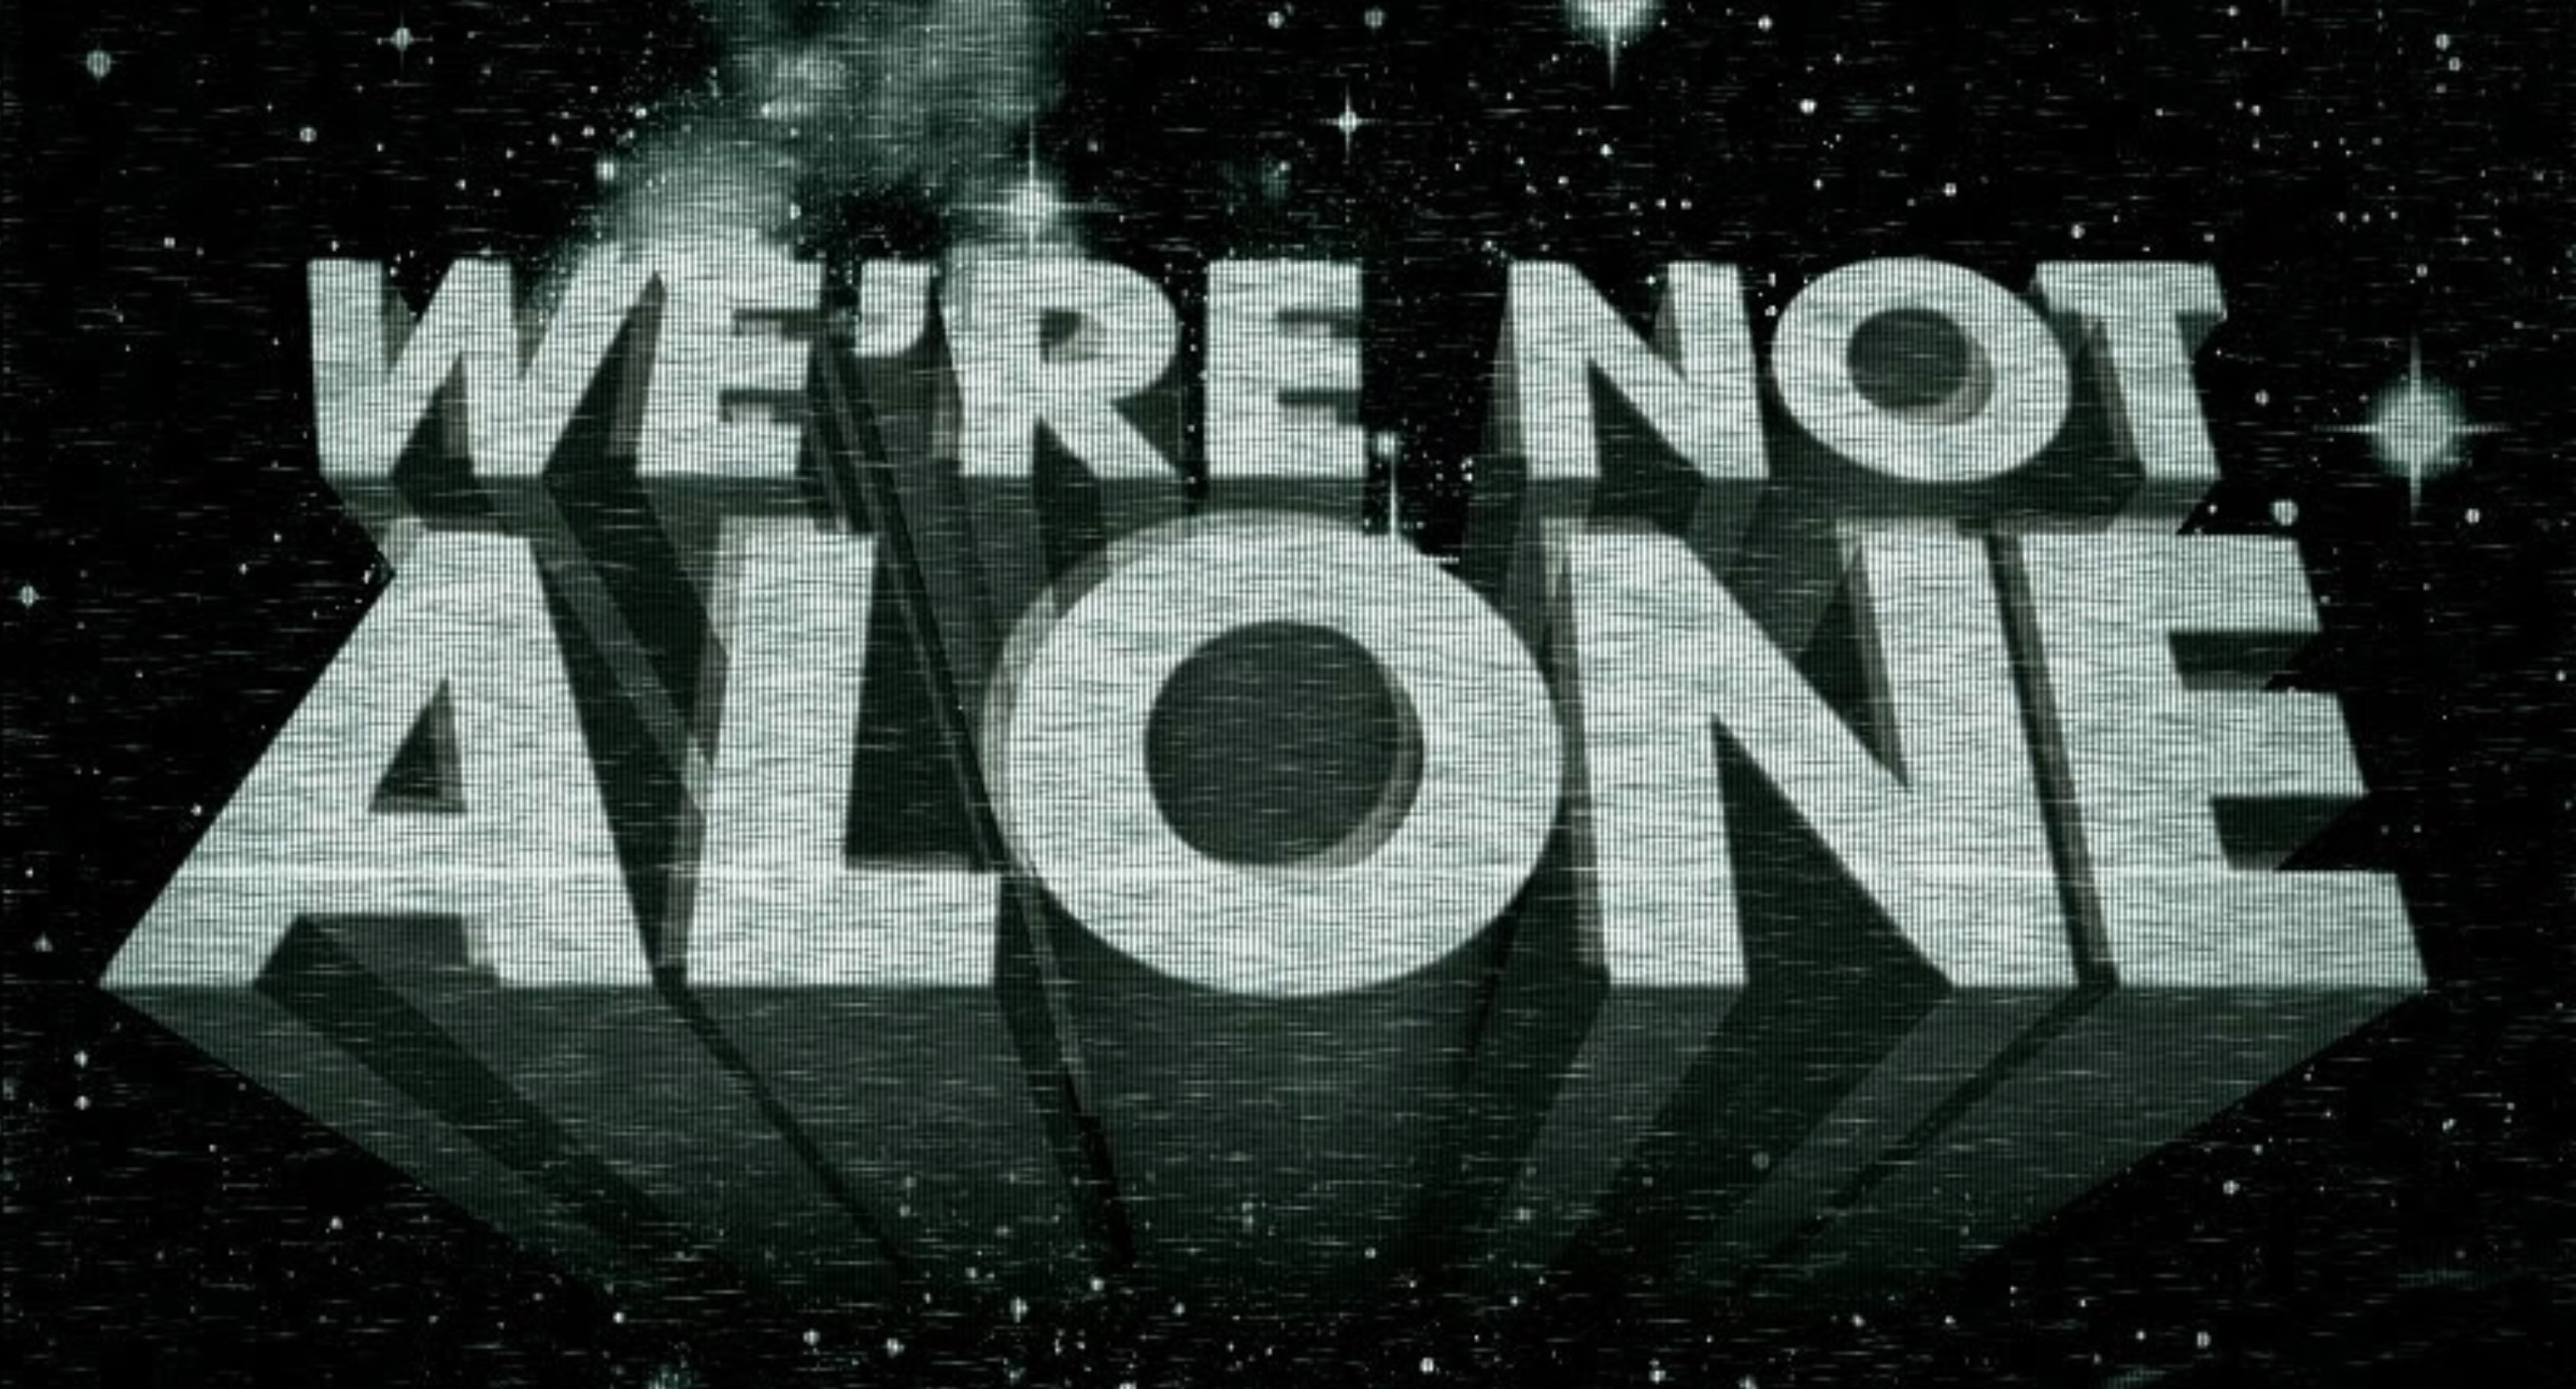 We're Not Alone
(in big block letters, in space)
